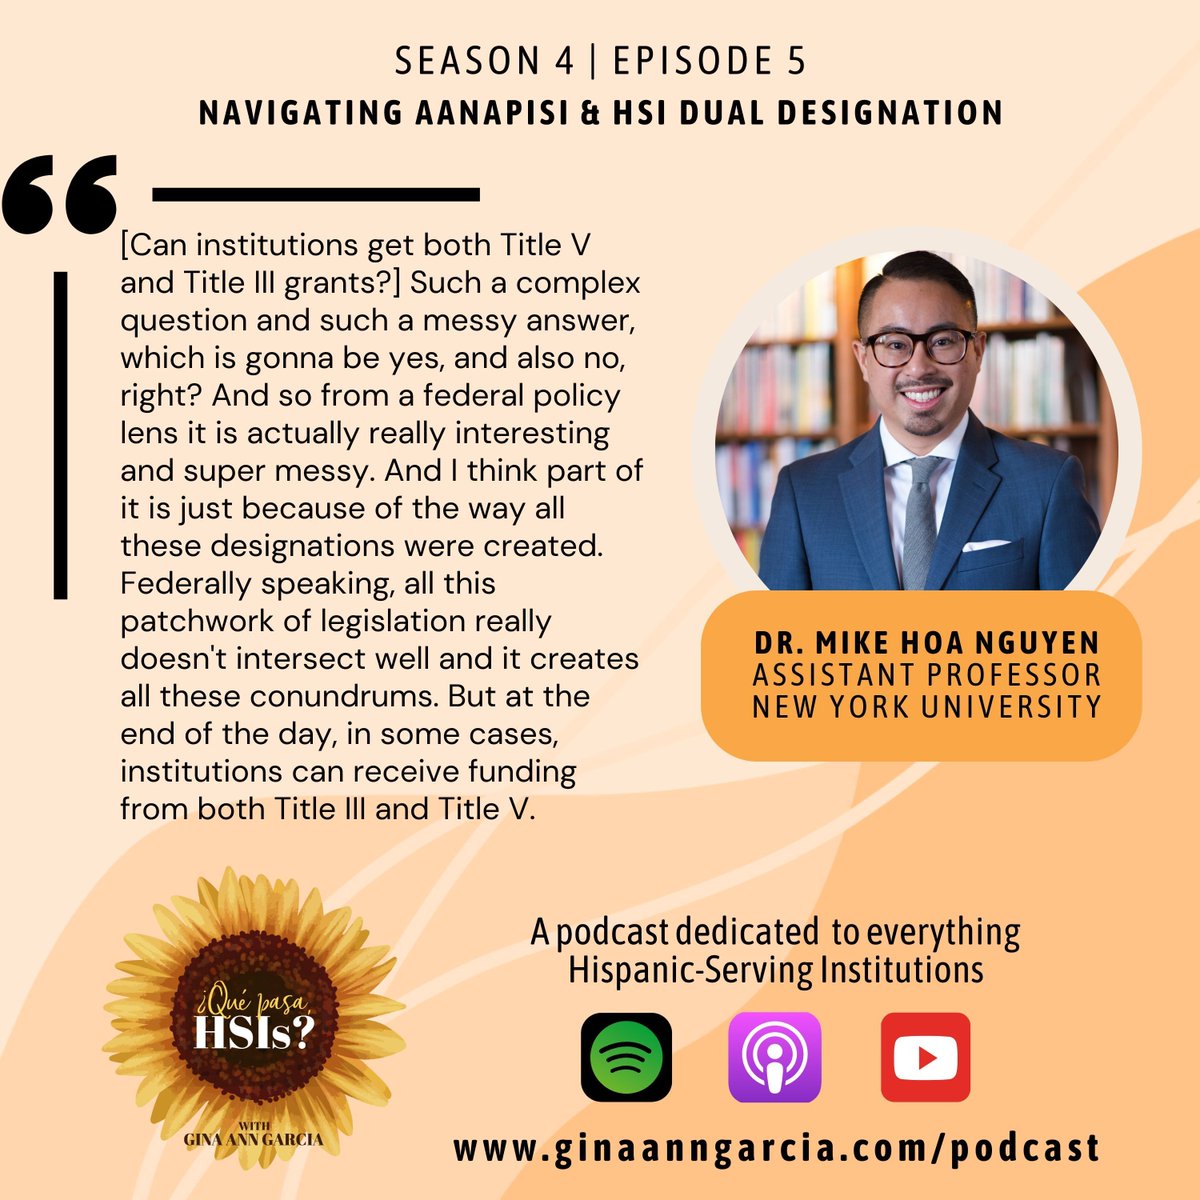 '[Can institutions get both Title V and Title III grants?] Such a complex question and such a messy answer, which is gonna be yes, and also no, right? ' - Dr. Mike Hoa Nguyen Listen to “Navigating AANAPISI & HSI Dual Designation” available at ginaanngarcia.com/podcast